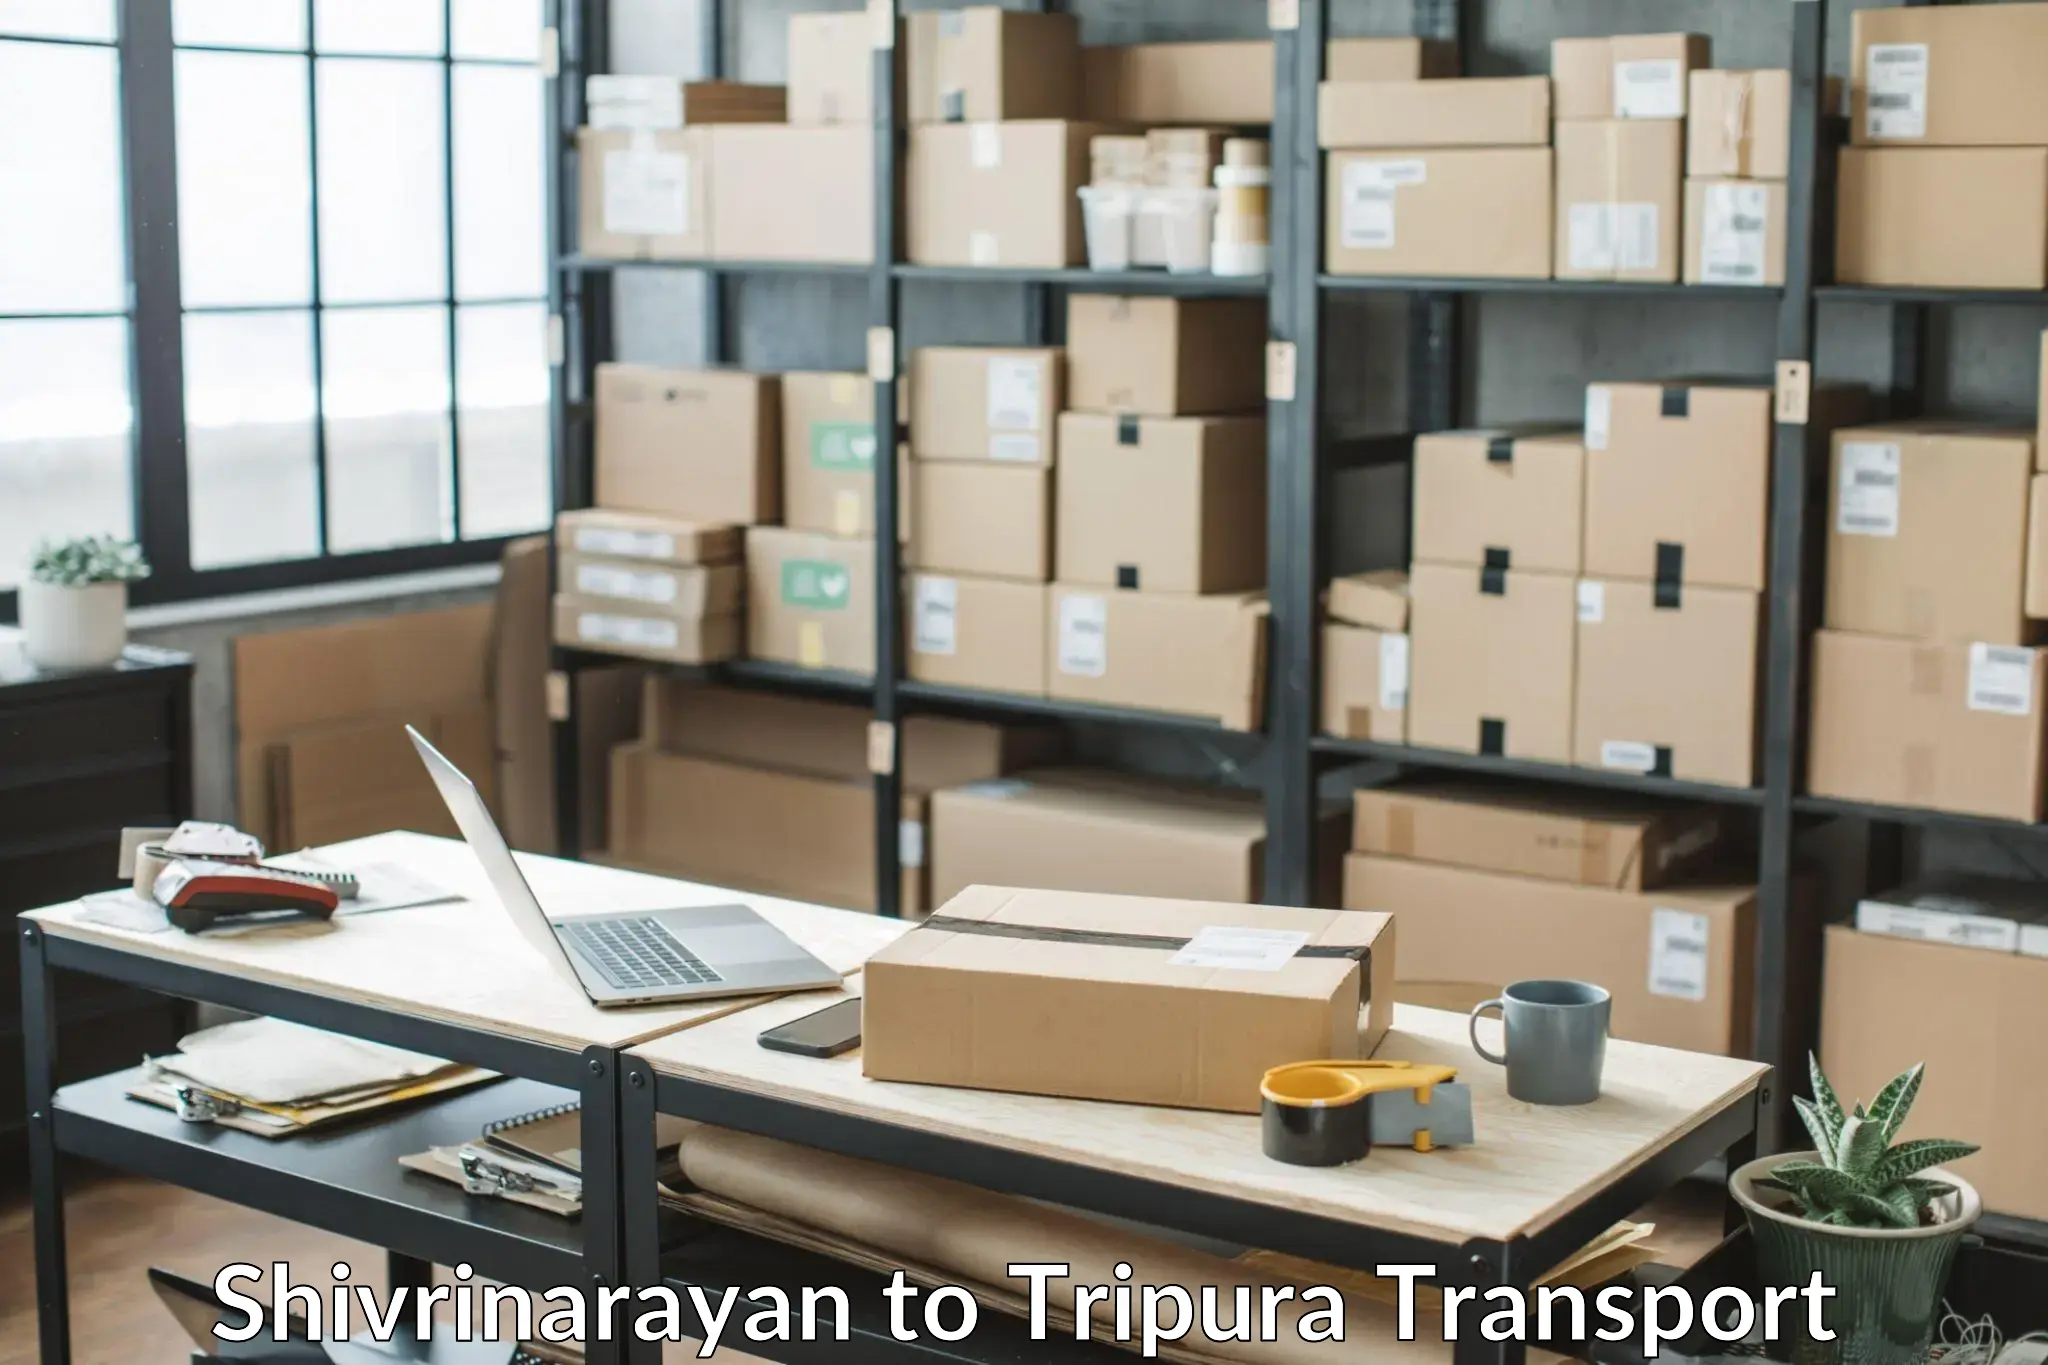 Goods delivery service Shivrinarayan to West Tripura